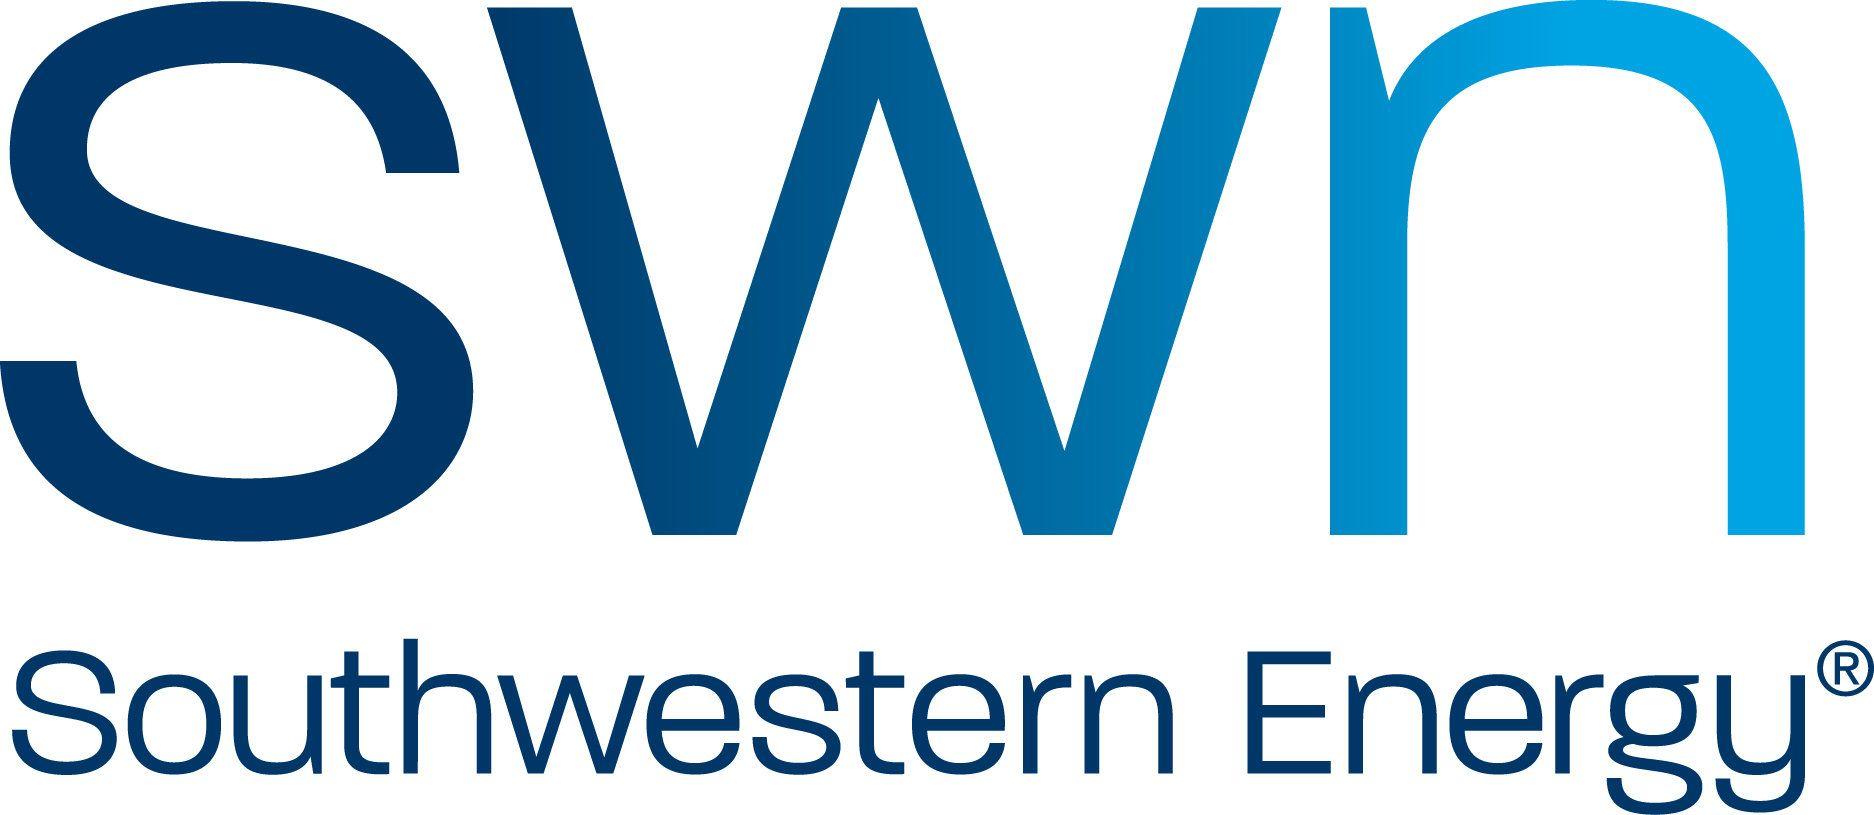 Southwest Company Logo - Southwestern Energy cuts 1,100 jobs, has no drilling rigs in ...